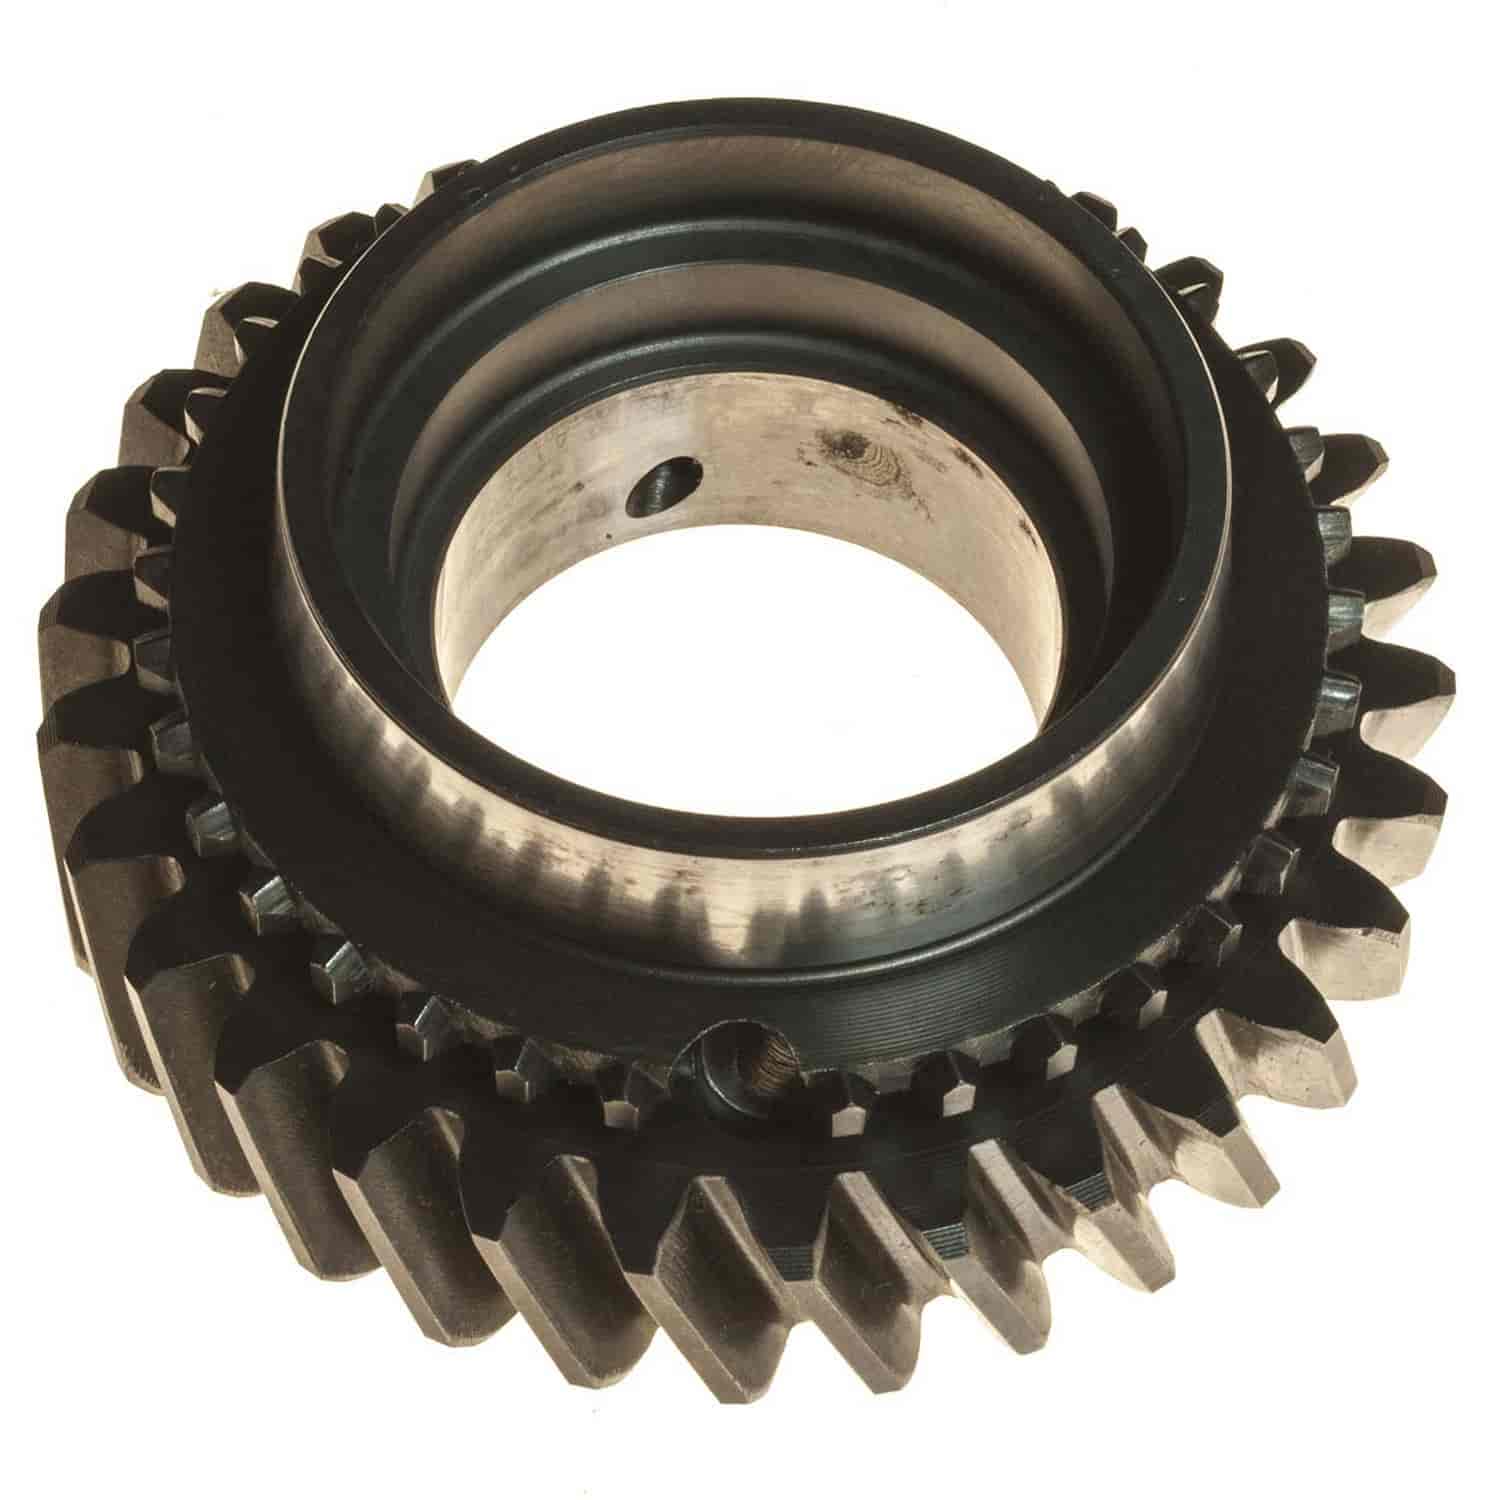 4th Gear Mainshaft 29/30 Tooth Count